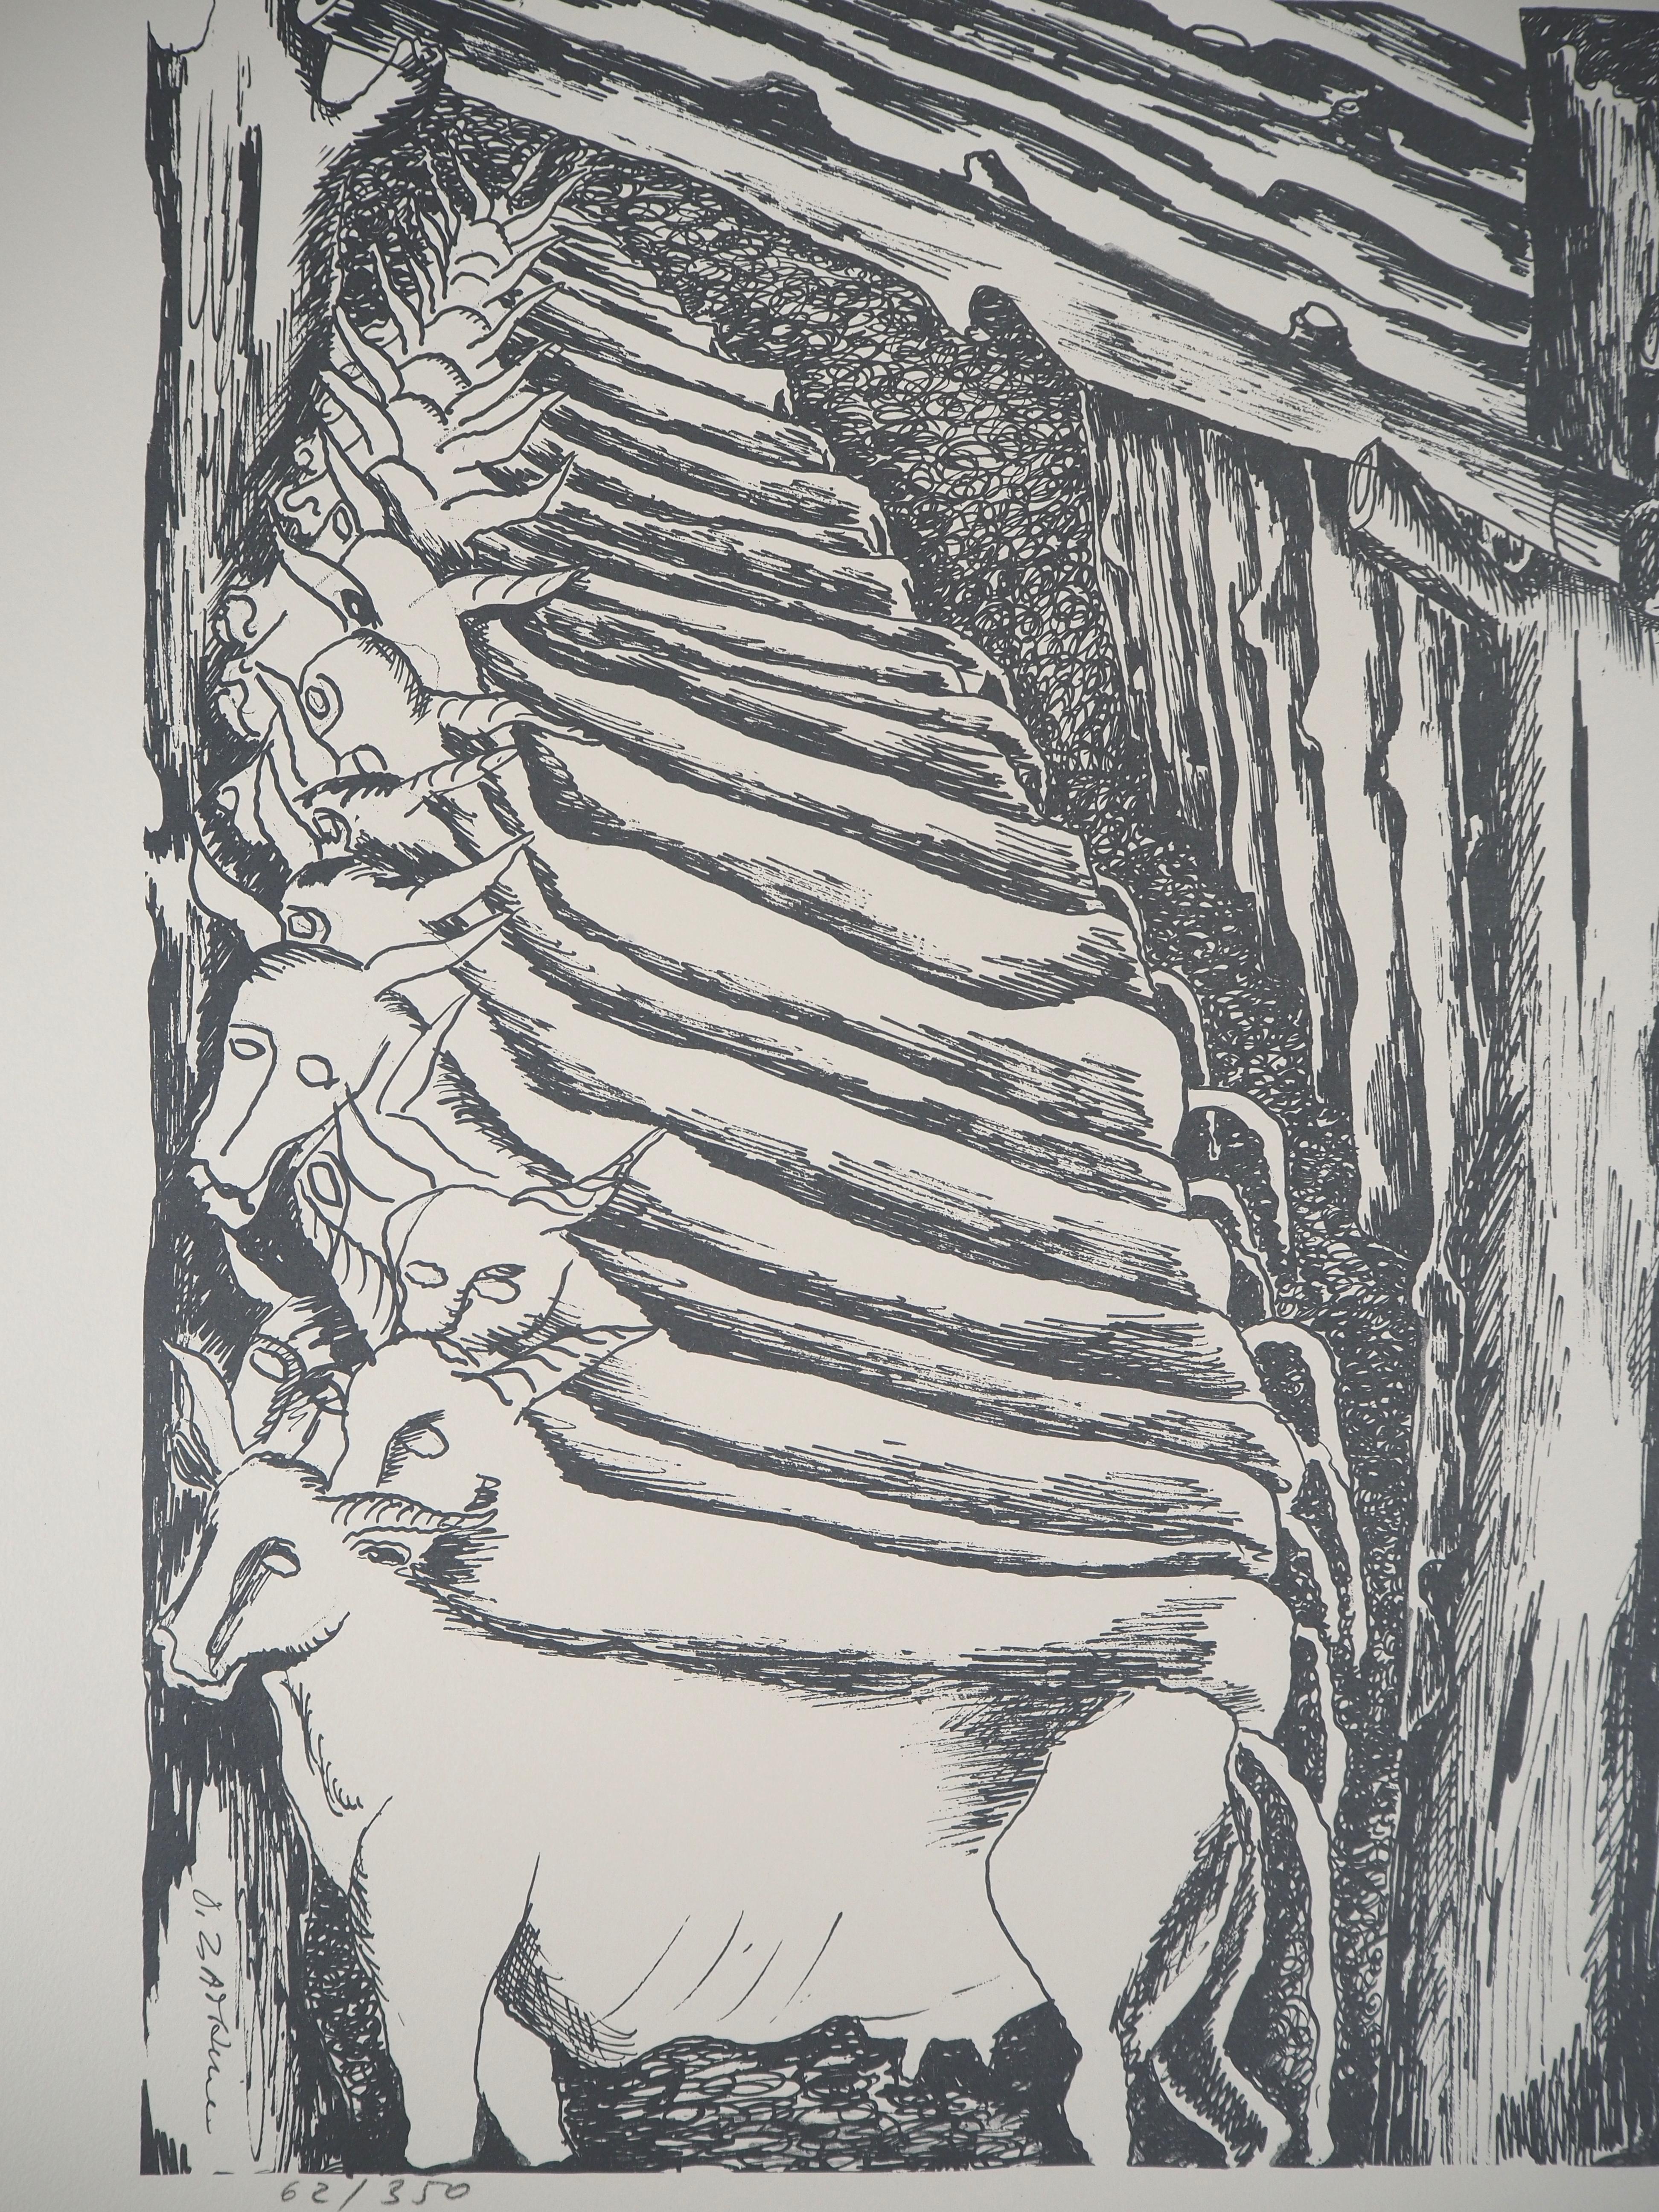 Mythology : Heracles and Stables - Original Lithograph Hand Signed & Numbered - Gray Figurative Print by Ossip Zadkine